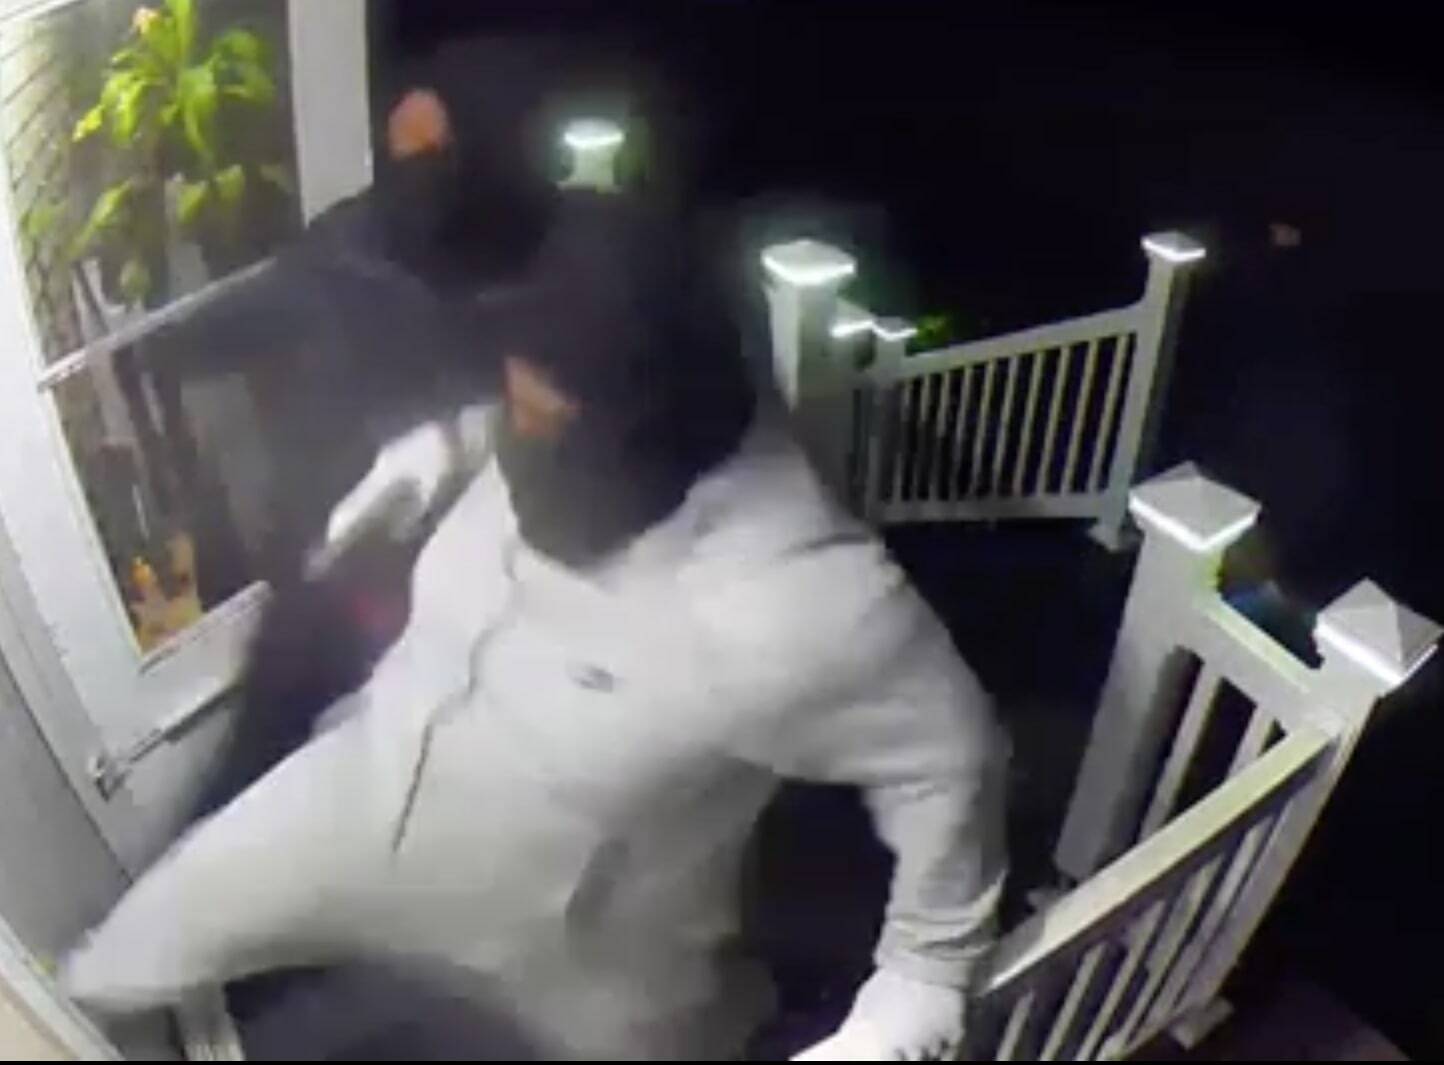 Screenshot of surveillance video that shows intruders trying to break into an Auburn residence.